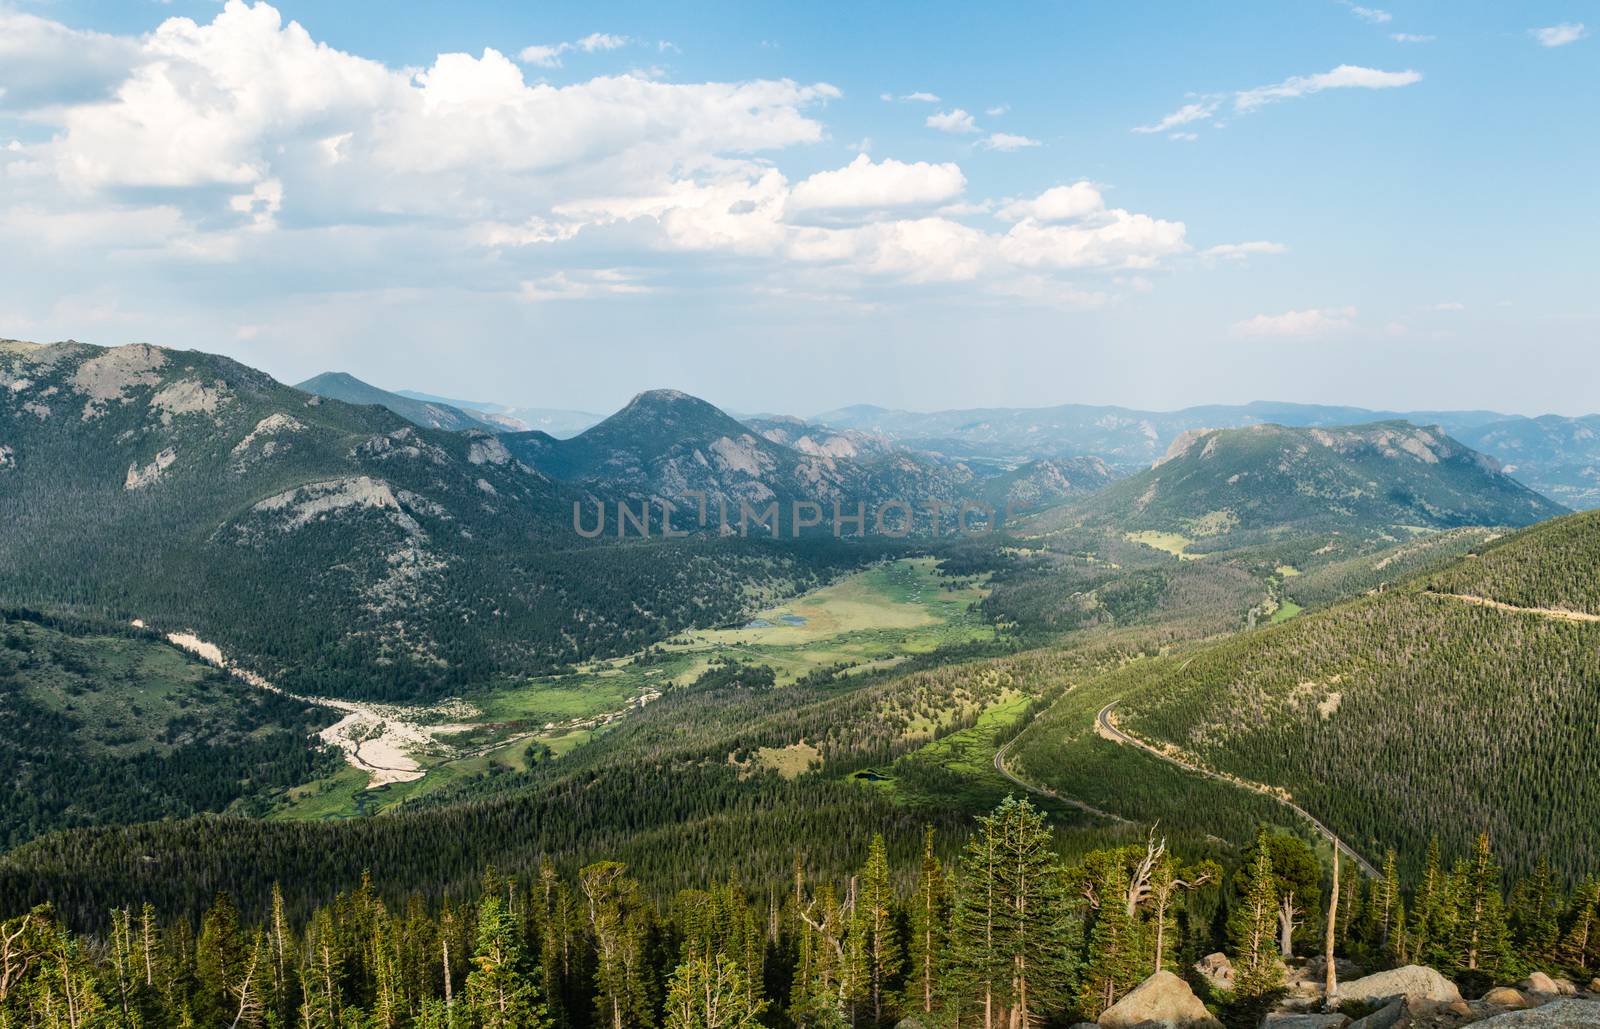 Looking down on Horseshoe Park in the Rocky Mountain National Park, Colorado